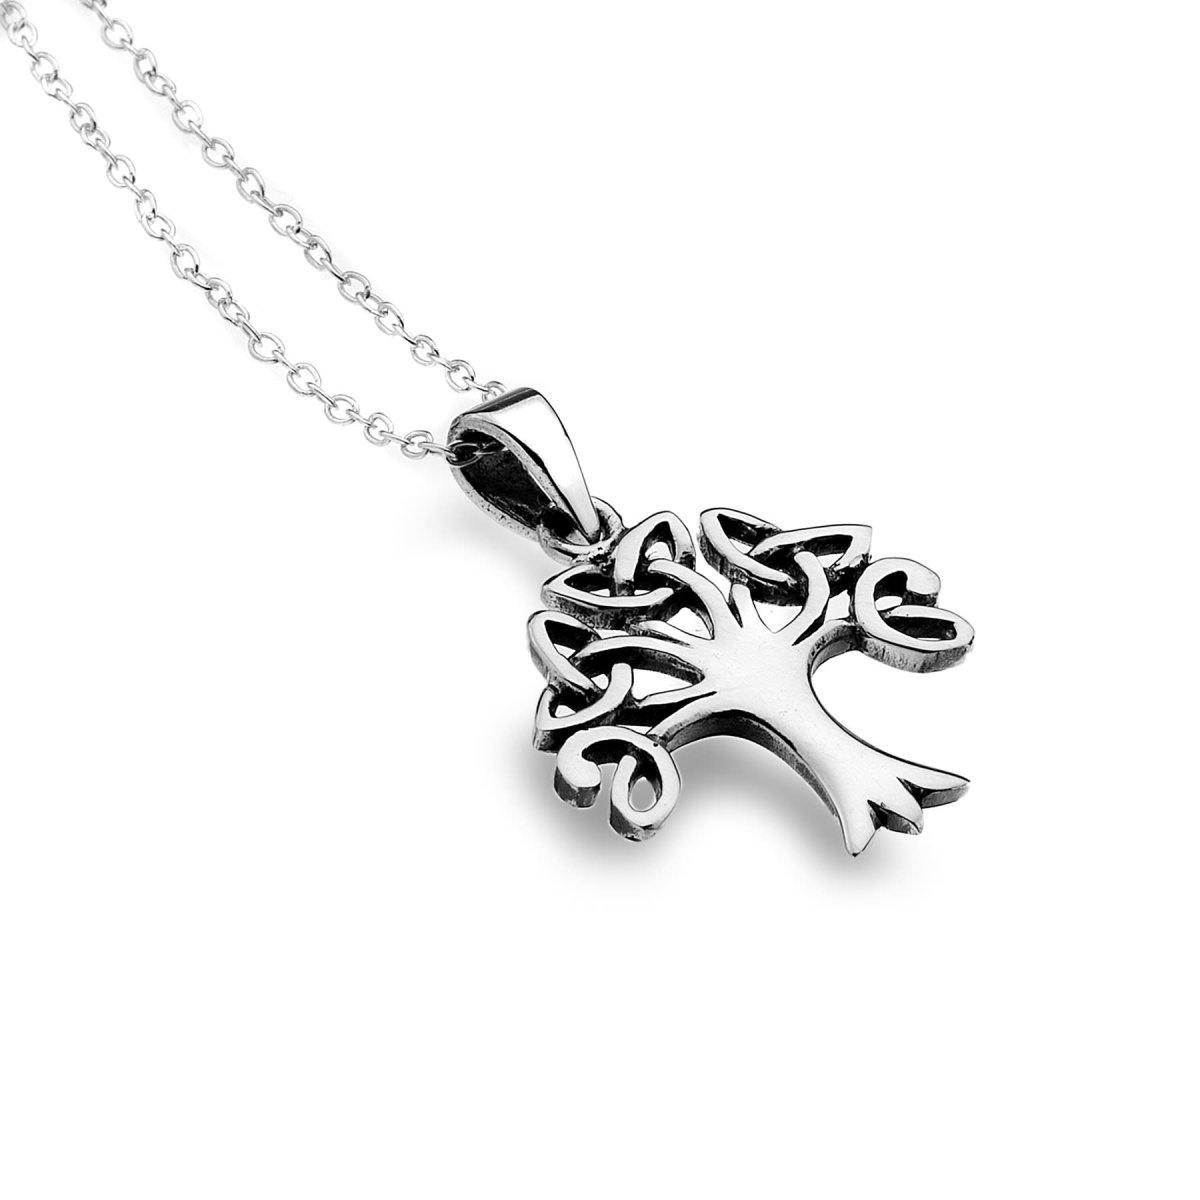 Knotted Celtic Tree of Life Pendant Necklace - celticgoods